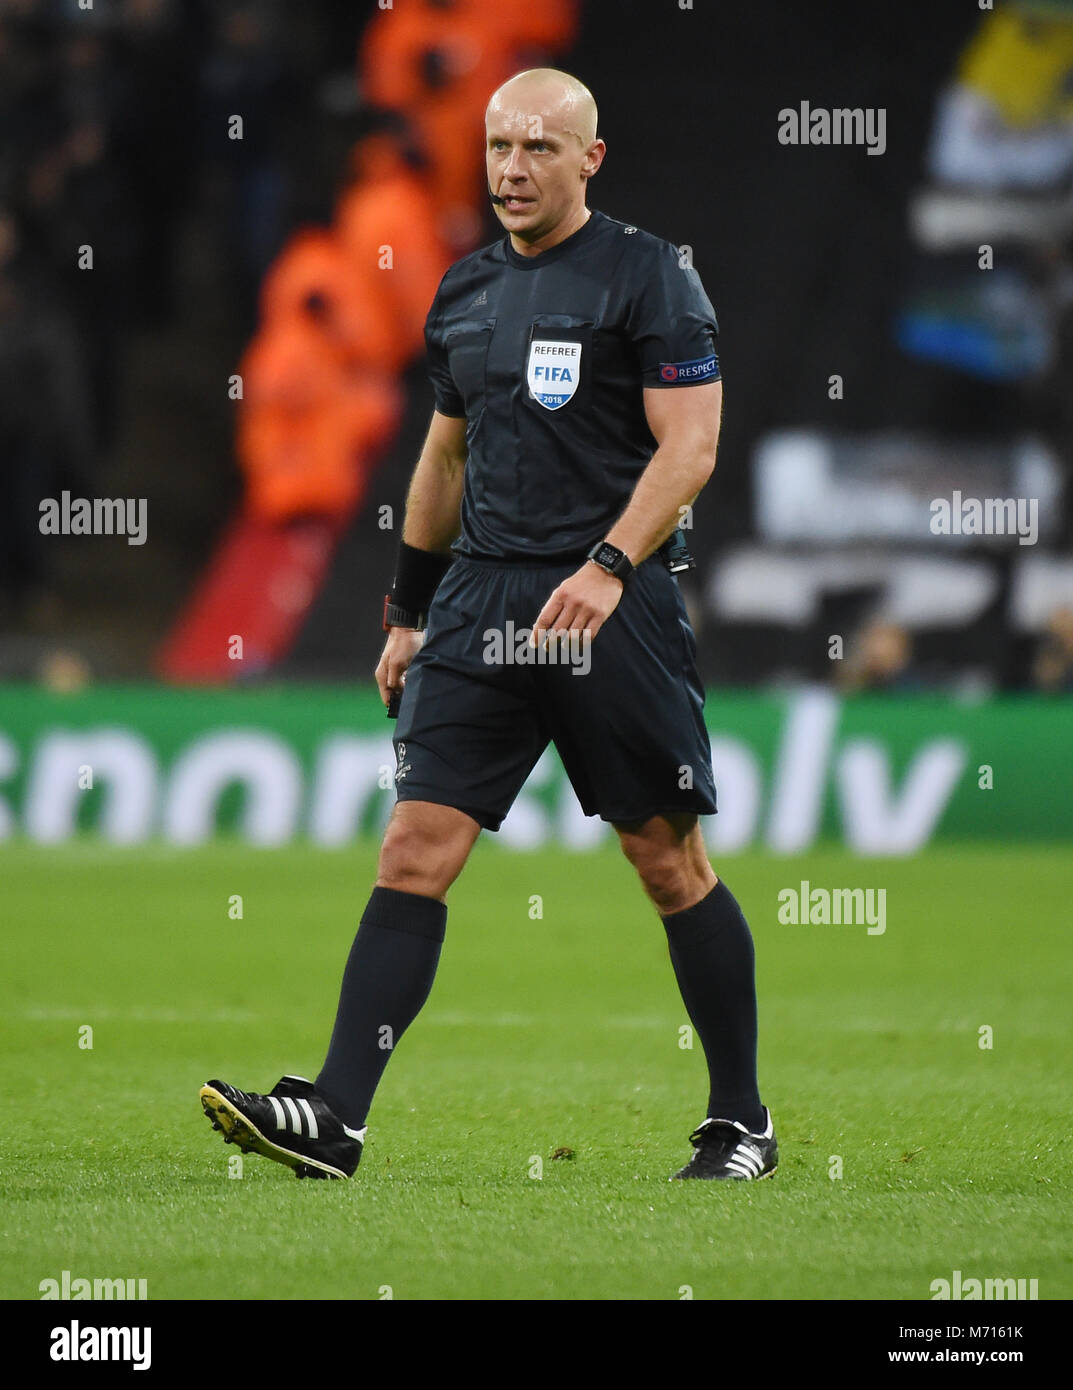 London, UK. 7th March, 2018. Referee Szymon Marciniak during the UEFA Champions League Round of 16 second leg match between Tottenham Hotspur and Juventus at Wembley Stadium on March 7th 2018 in London, England. Credit: PHC Images/Alamy Live News Stock Photo